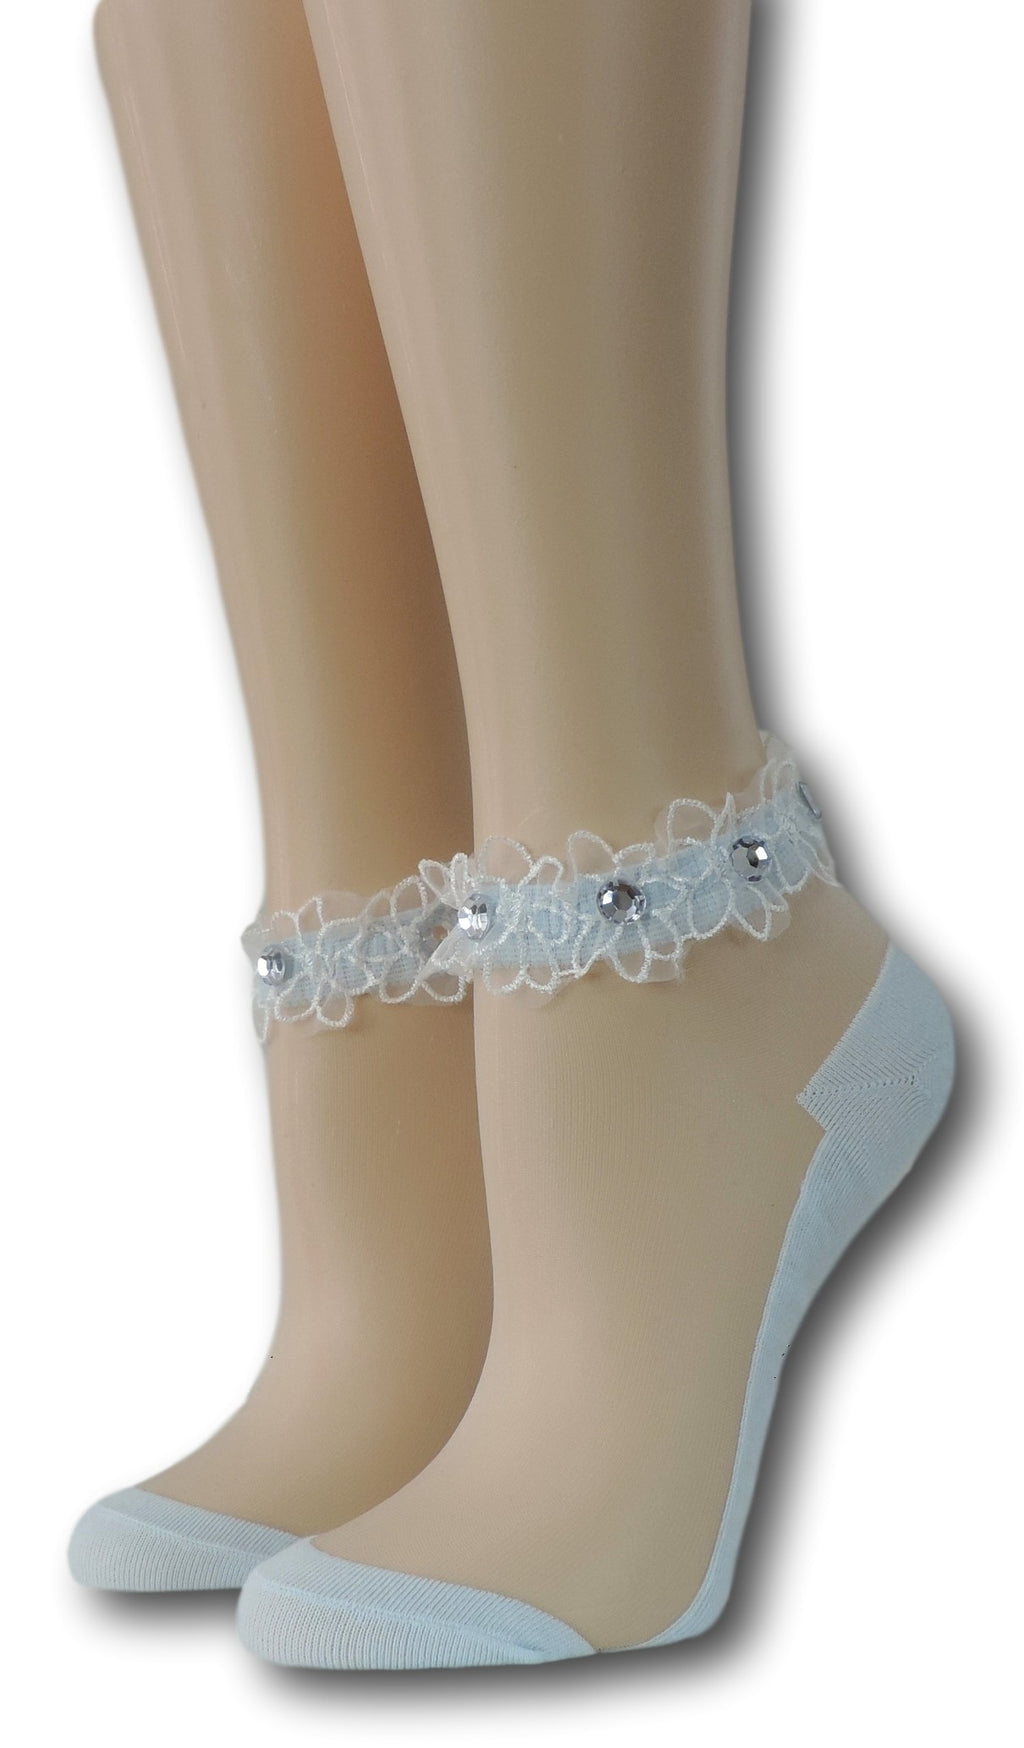 Baby Blue Ankle Sheer Socks with beads